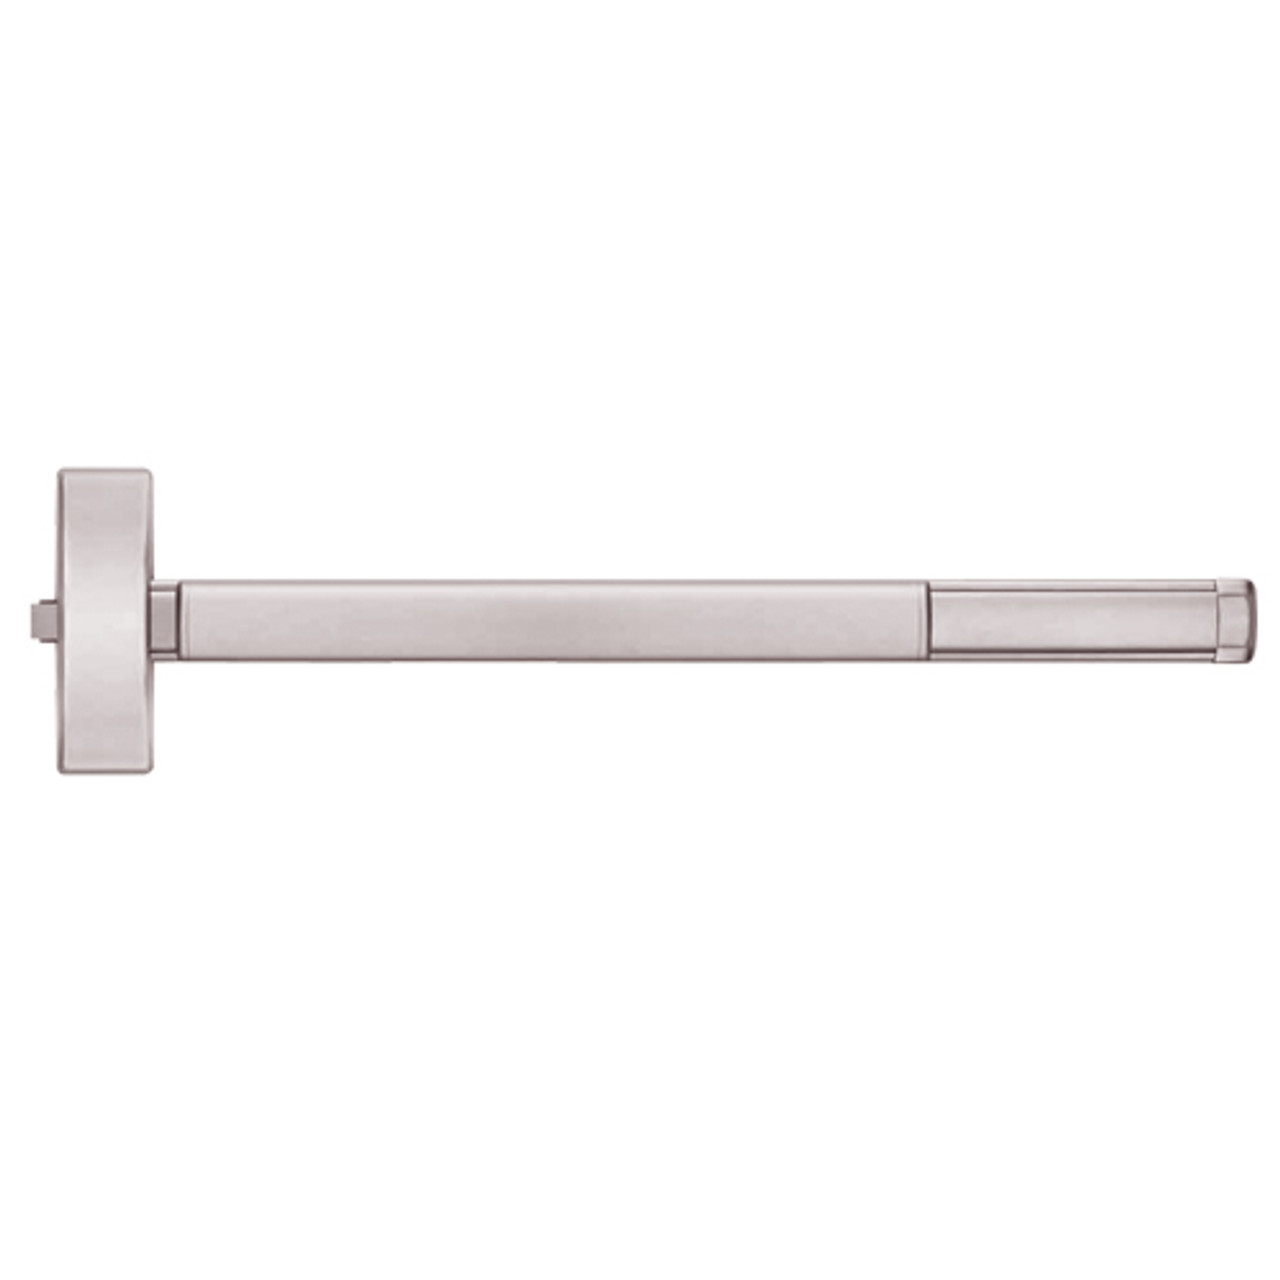 TS2101-628-48 PHI 2100 Series Non Fire Rated Apex Rim Exit Device with Touchbar Monitoring Switch Prepped for Cover Plate in Satin Aluminum Finish